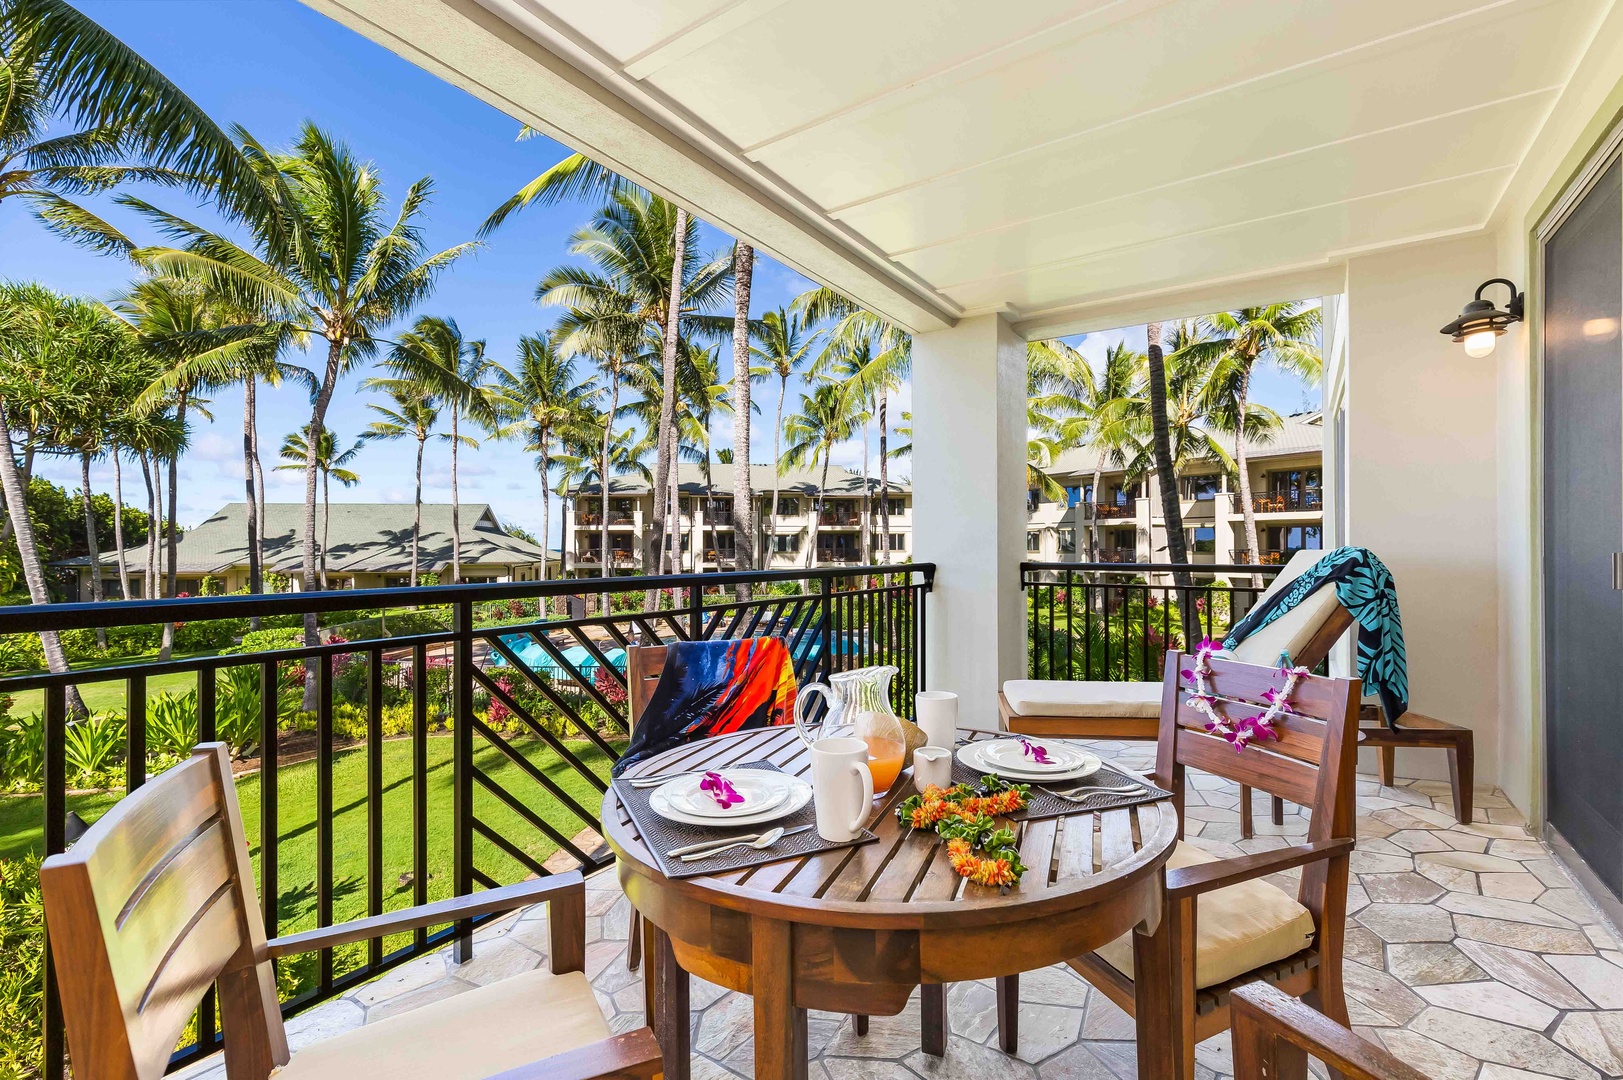 Kahuku Vacation Rentals, Turtle Bay Villas 205/206 - guests may wish to unwind on two lovely, private 158-square foot lanais, which are furnished with a dining table and chaise lounge.